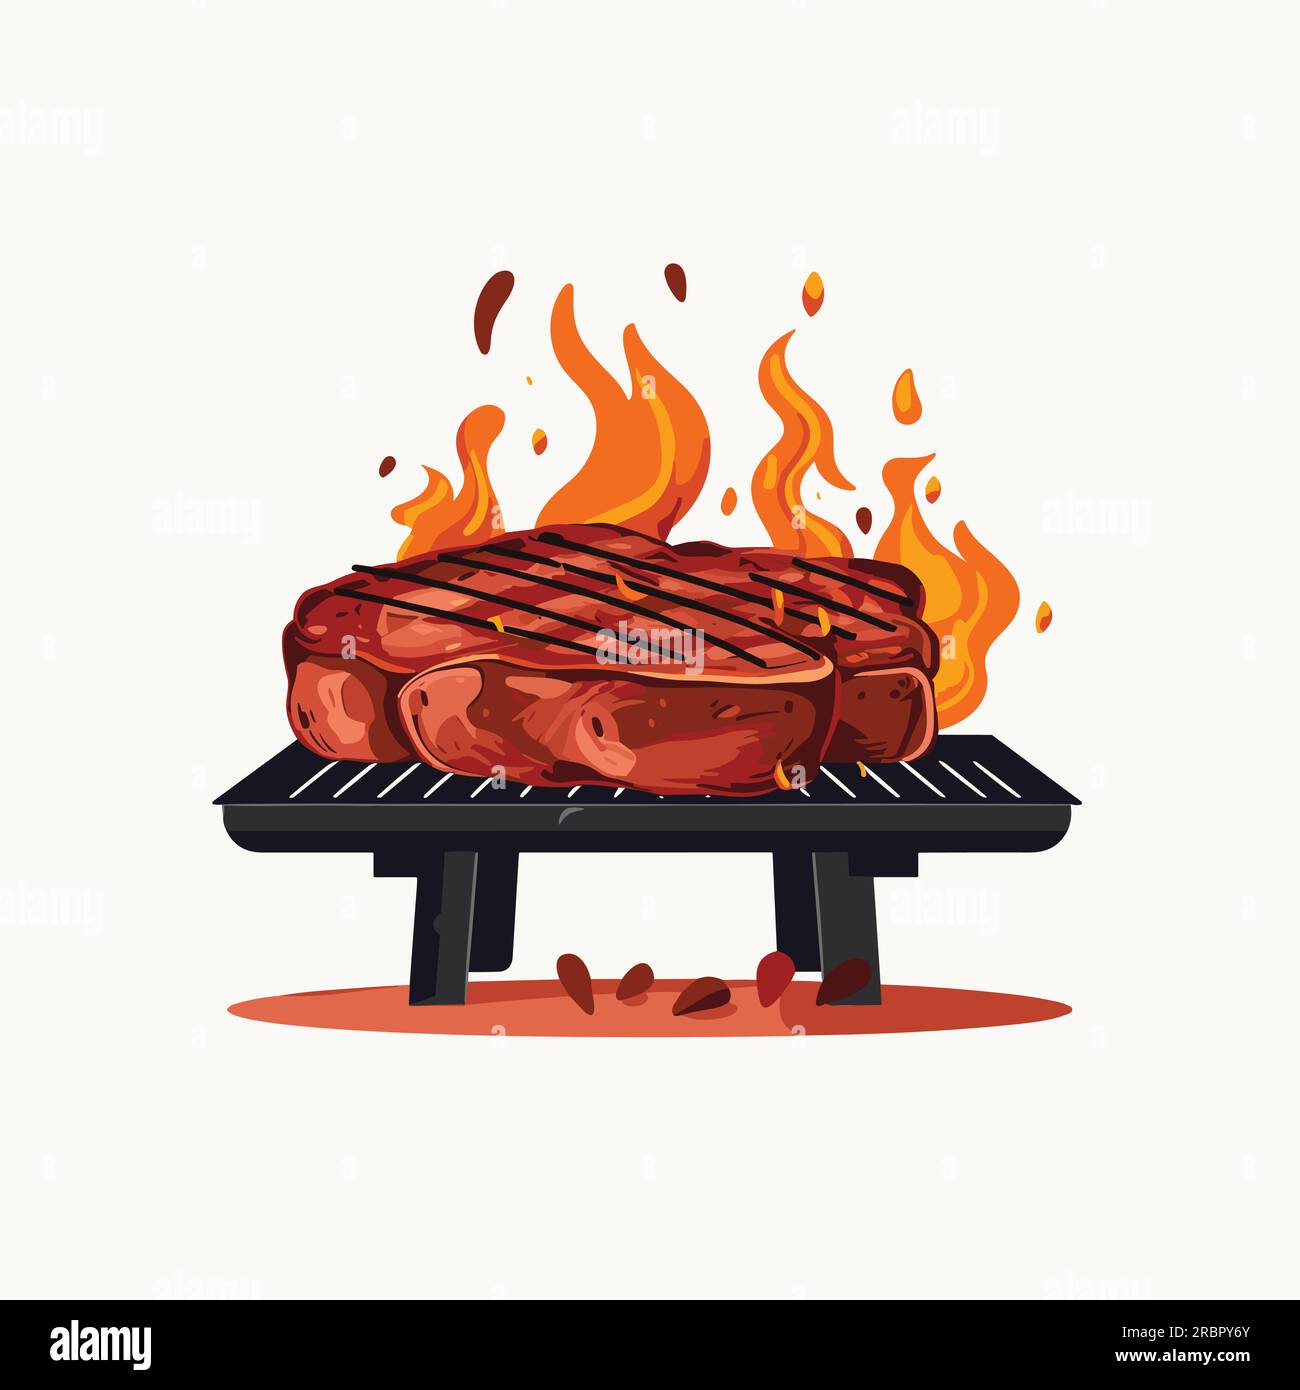 https://c8.alamy.com/comp/2RBPY6Y/piece-of-meat-on-grill-vector-flat-minimalistic-isolated-2RBPY6Y.jpg